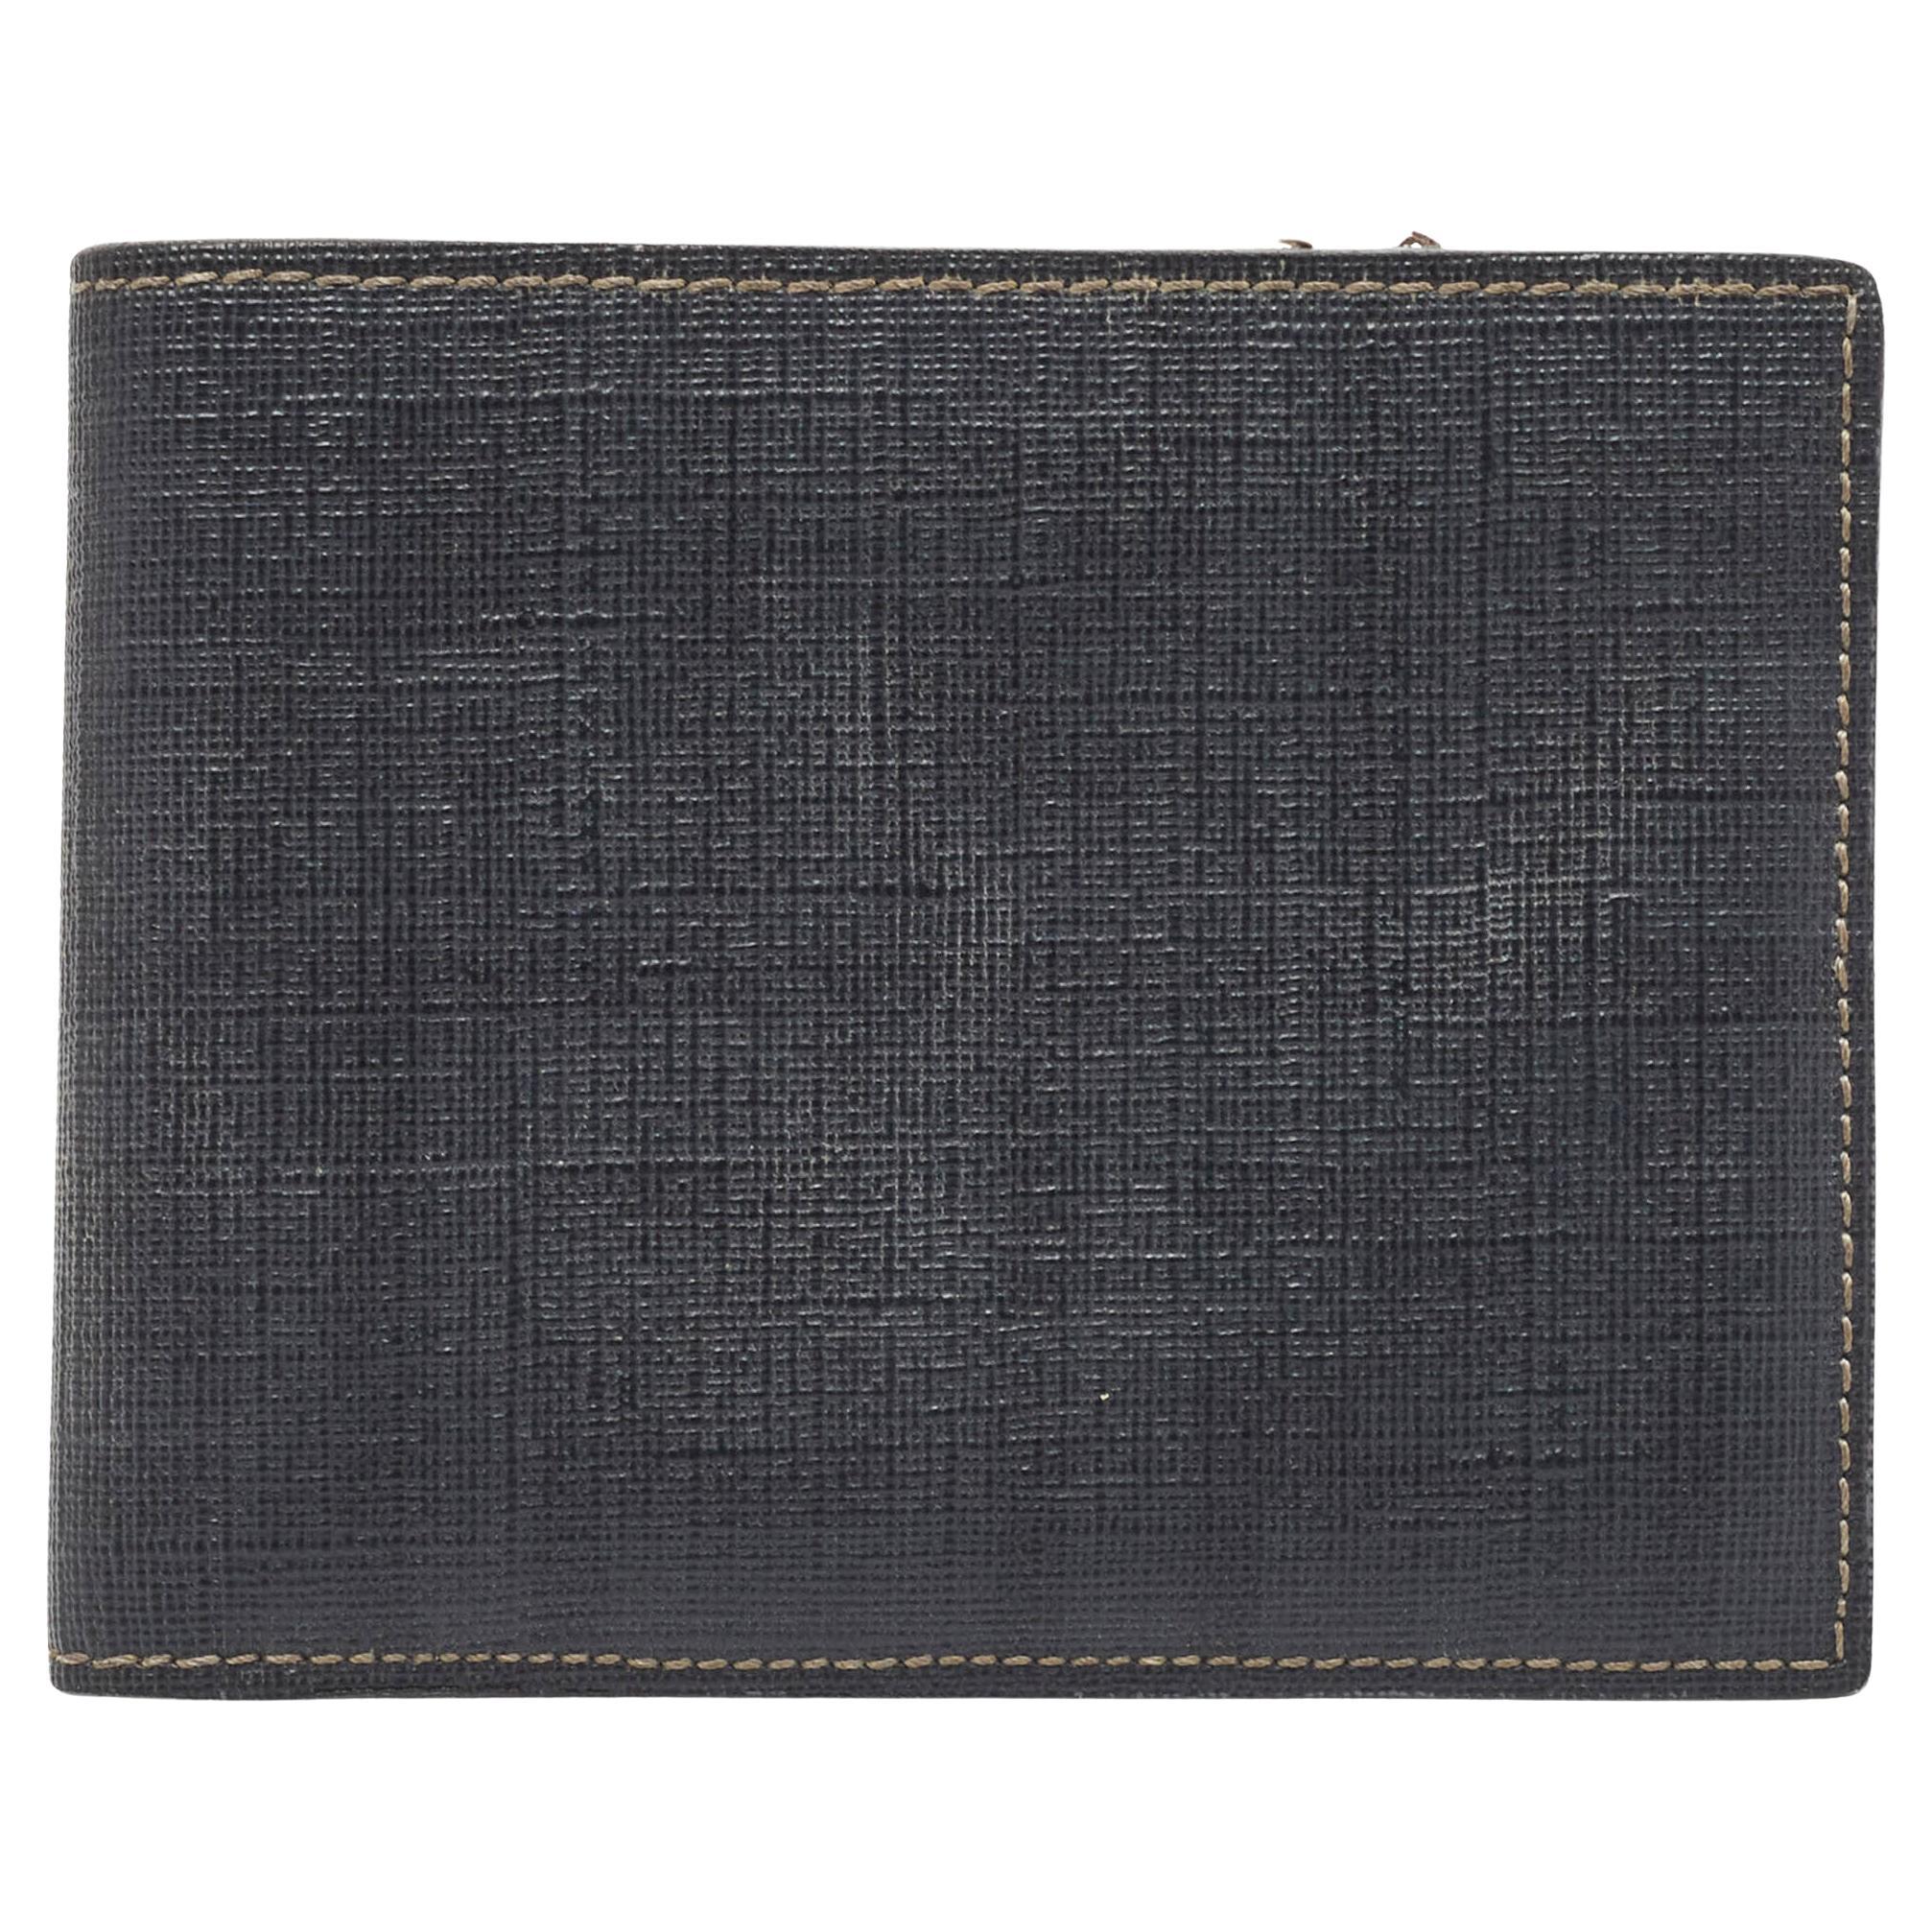 Fendi Grey Zucca Coated Canvas Bifold Wallet For Sale